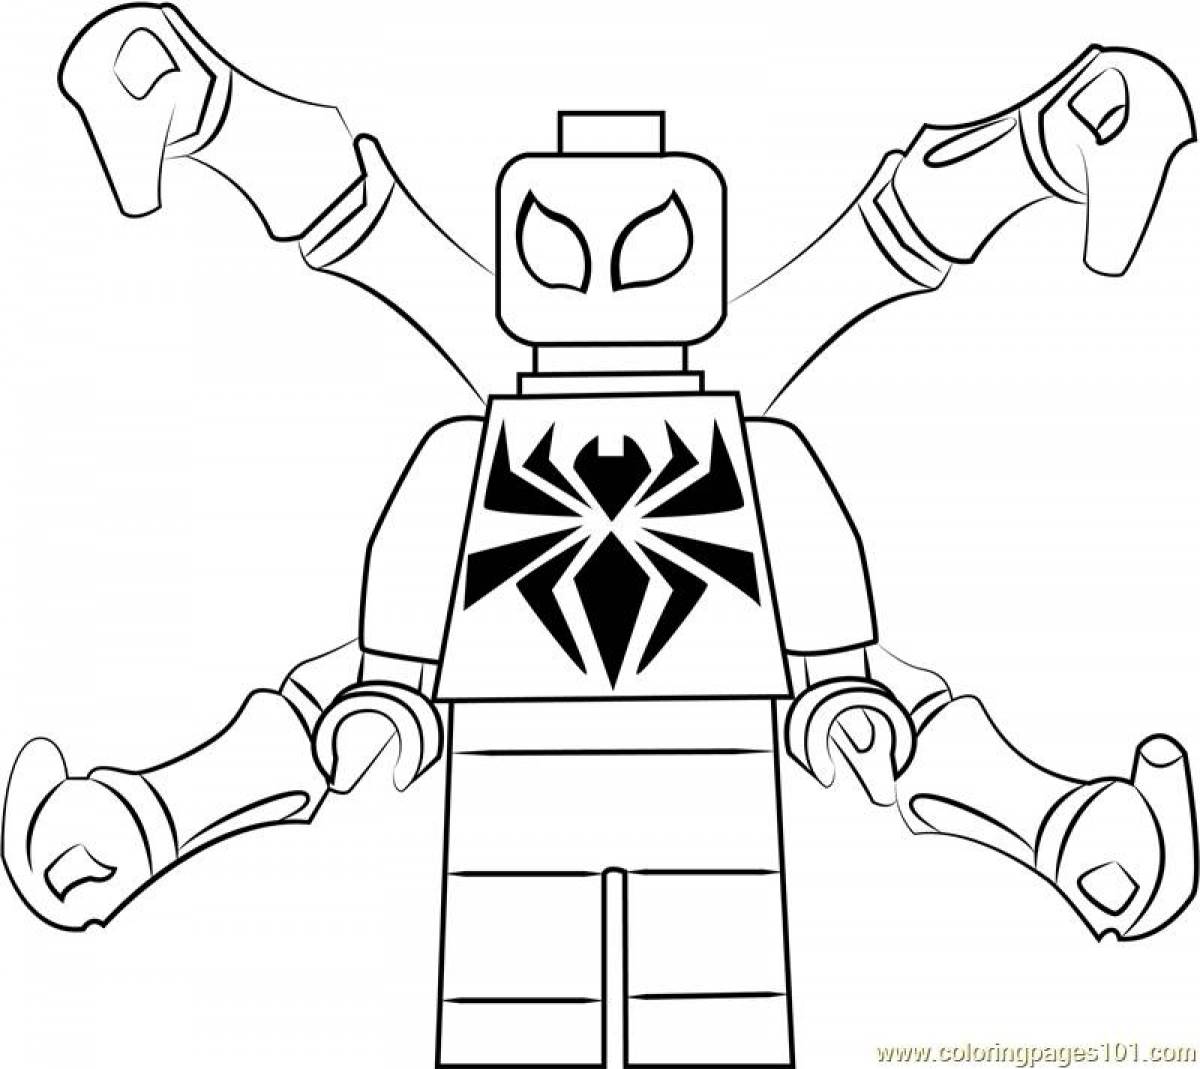 Great coloring lego spider man